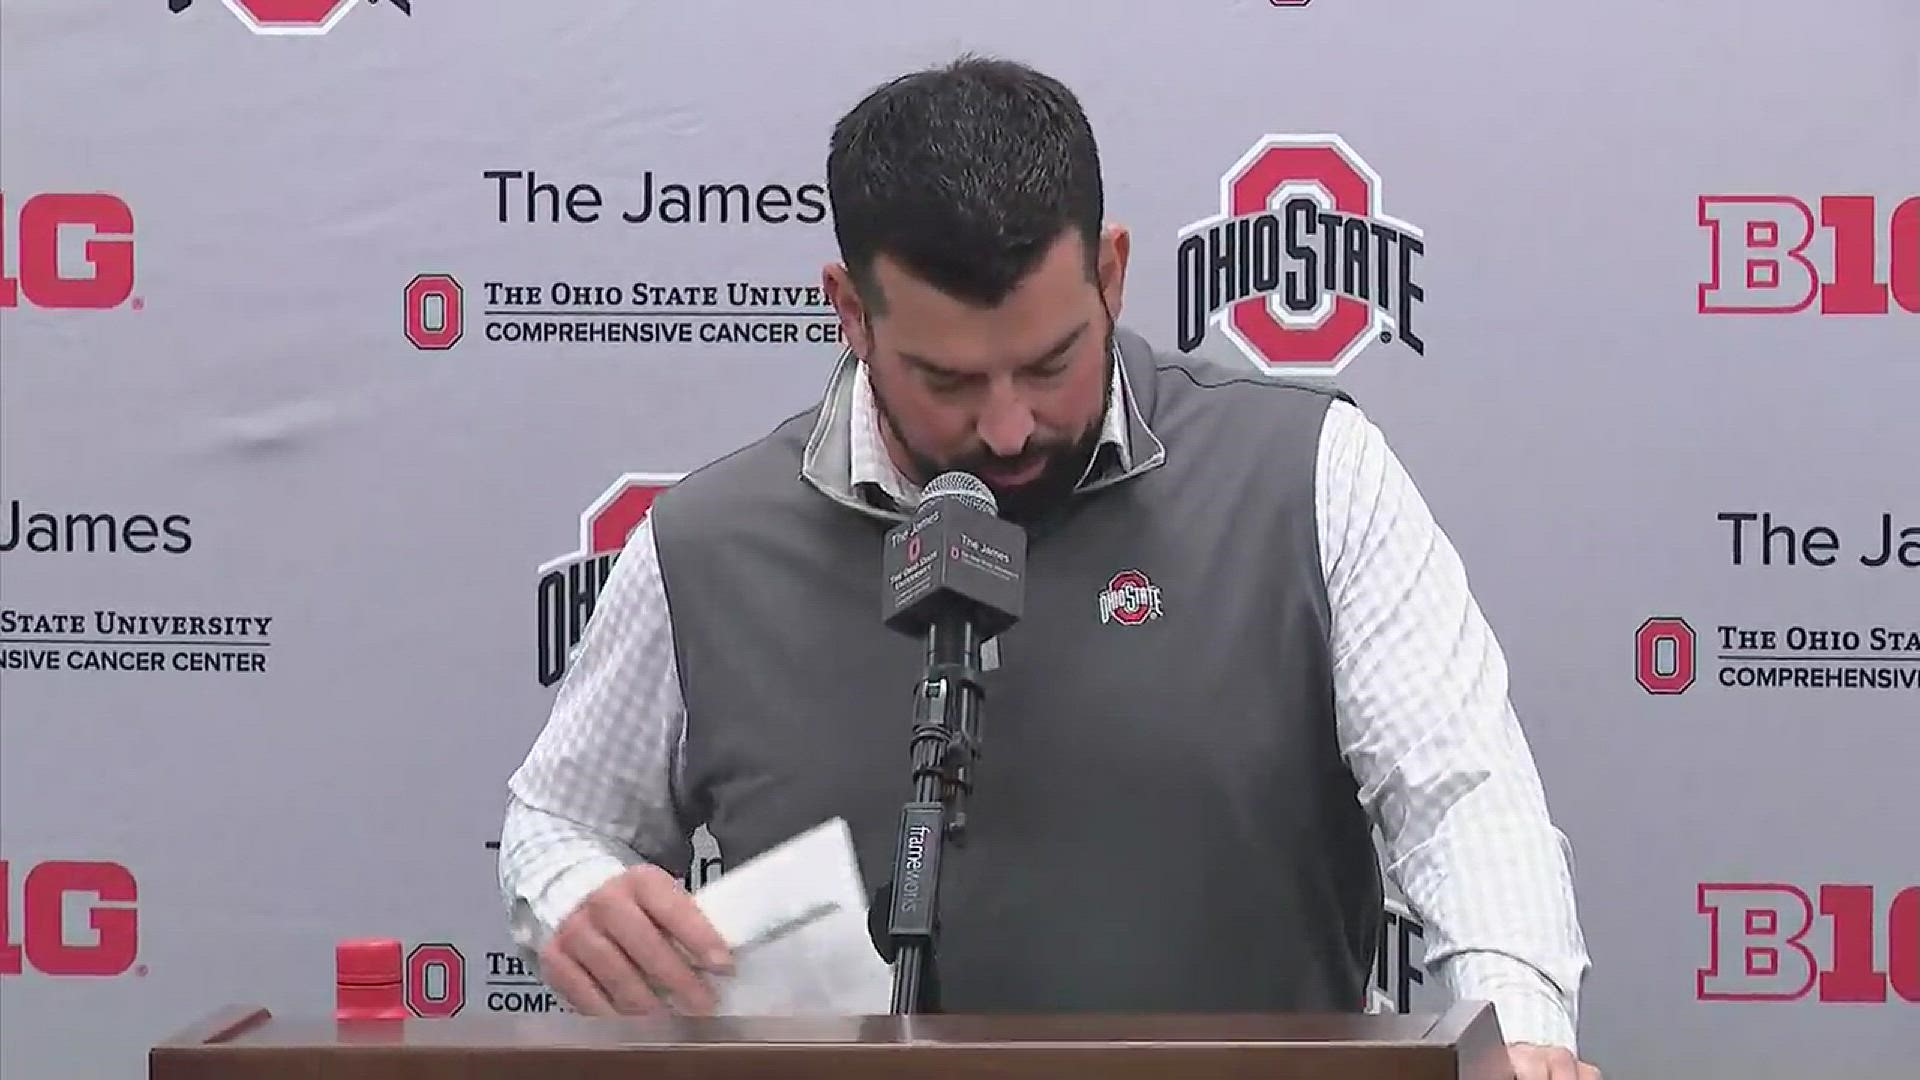 Ohio State's head coach provides an update on his team's progress this spring ahead of this weekend's annual Spring Game.